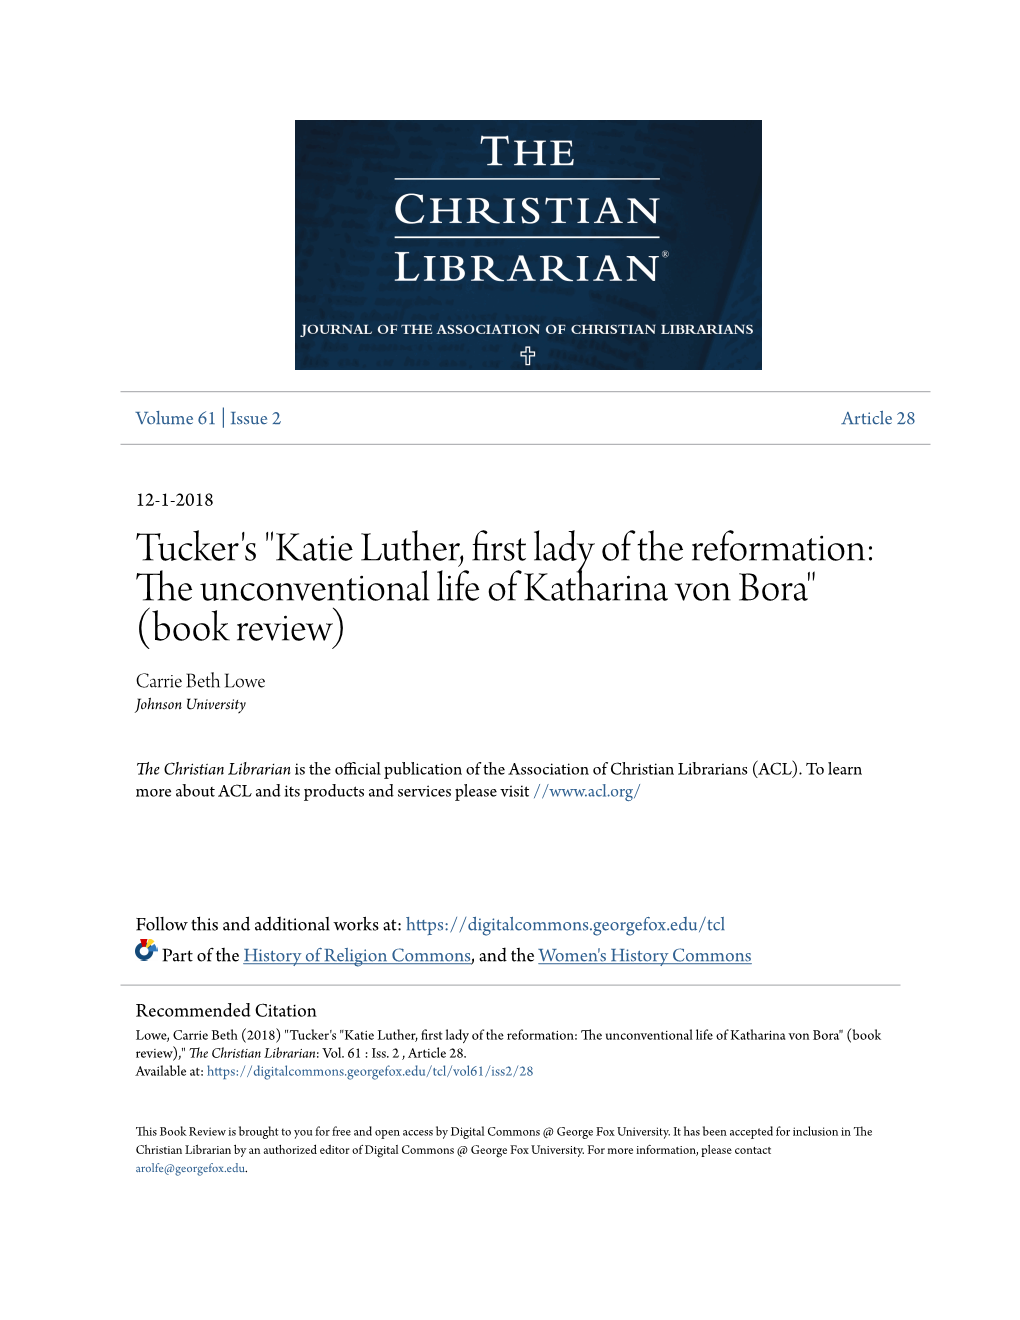 Tucker's "Katie Luther, First Lady of the Reformation: the Unconventional Life of Katharina Von Bora" (Book Review) Carrie Beth Lowe Johnson University